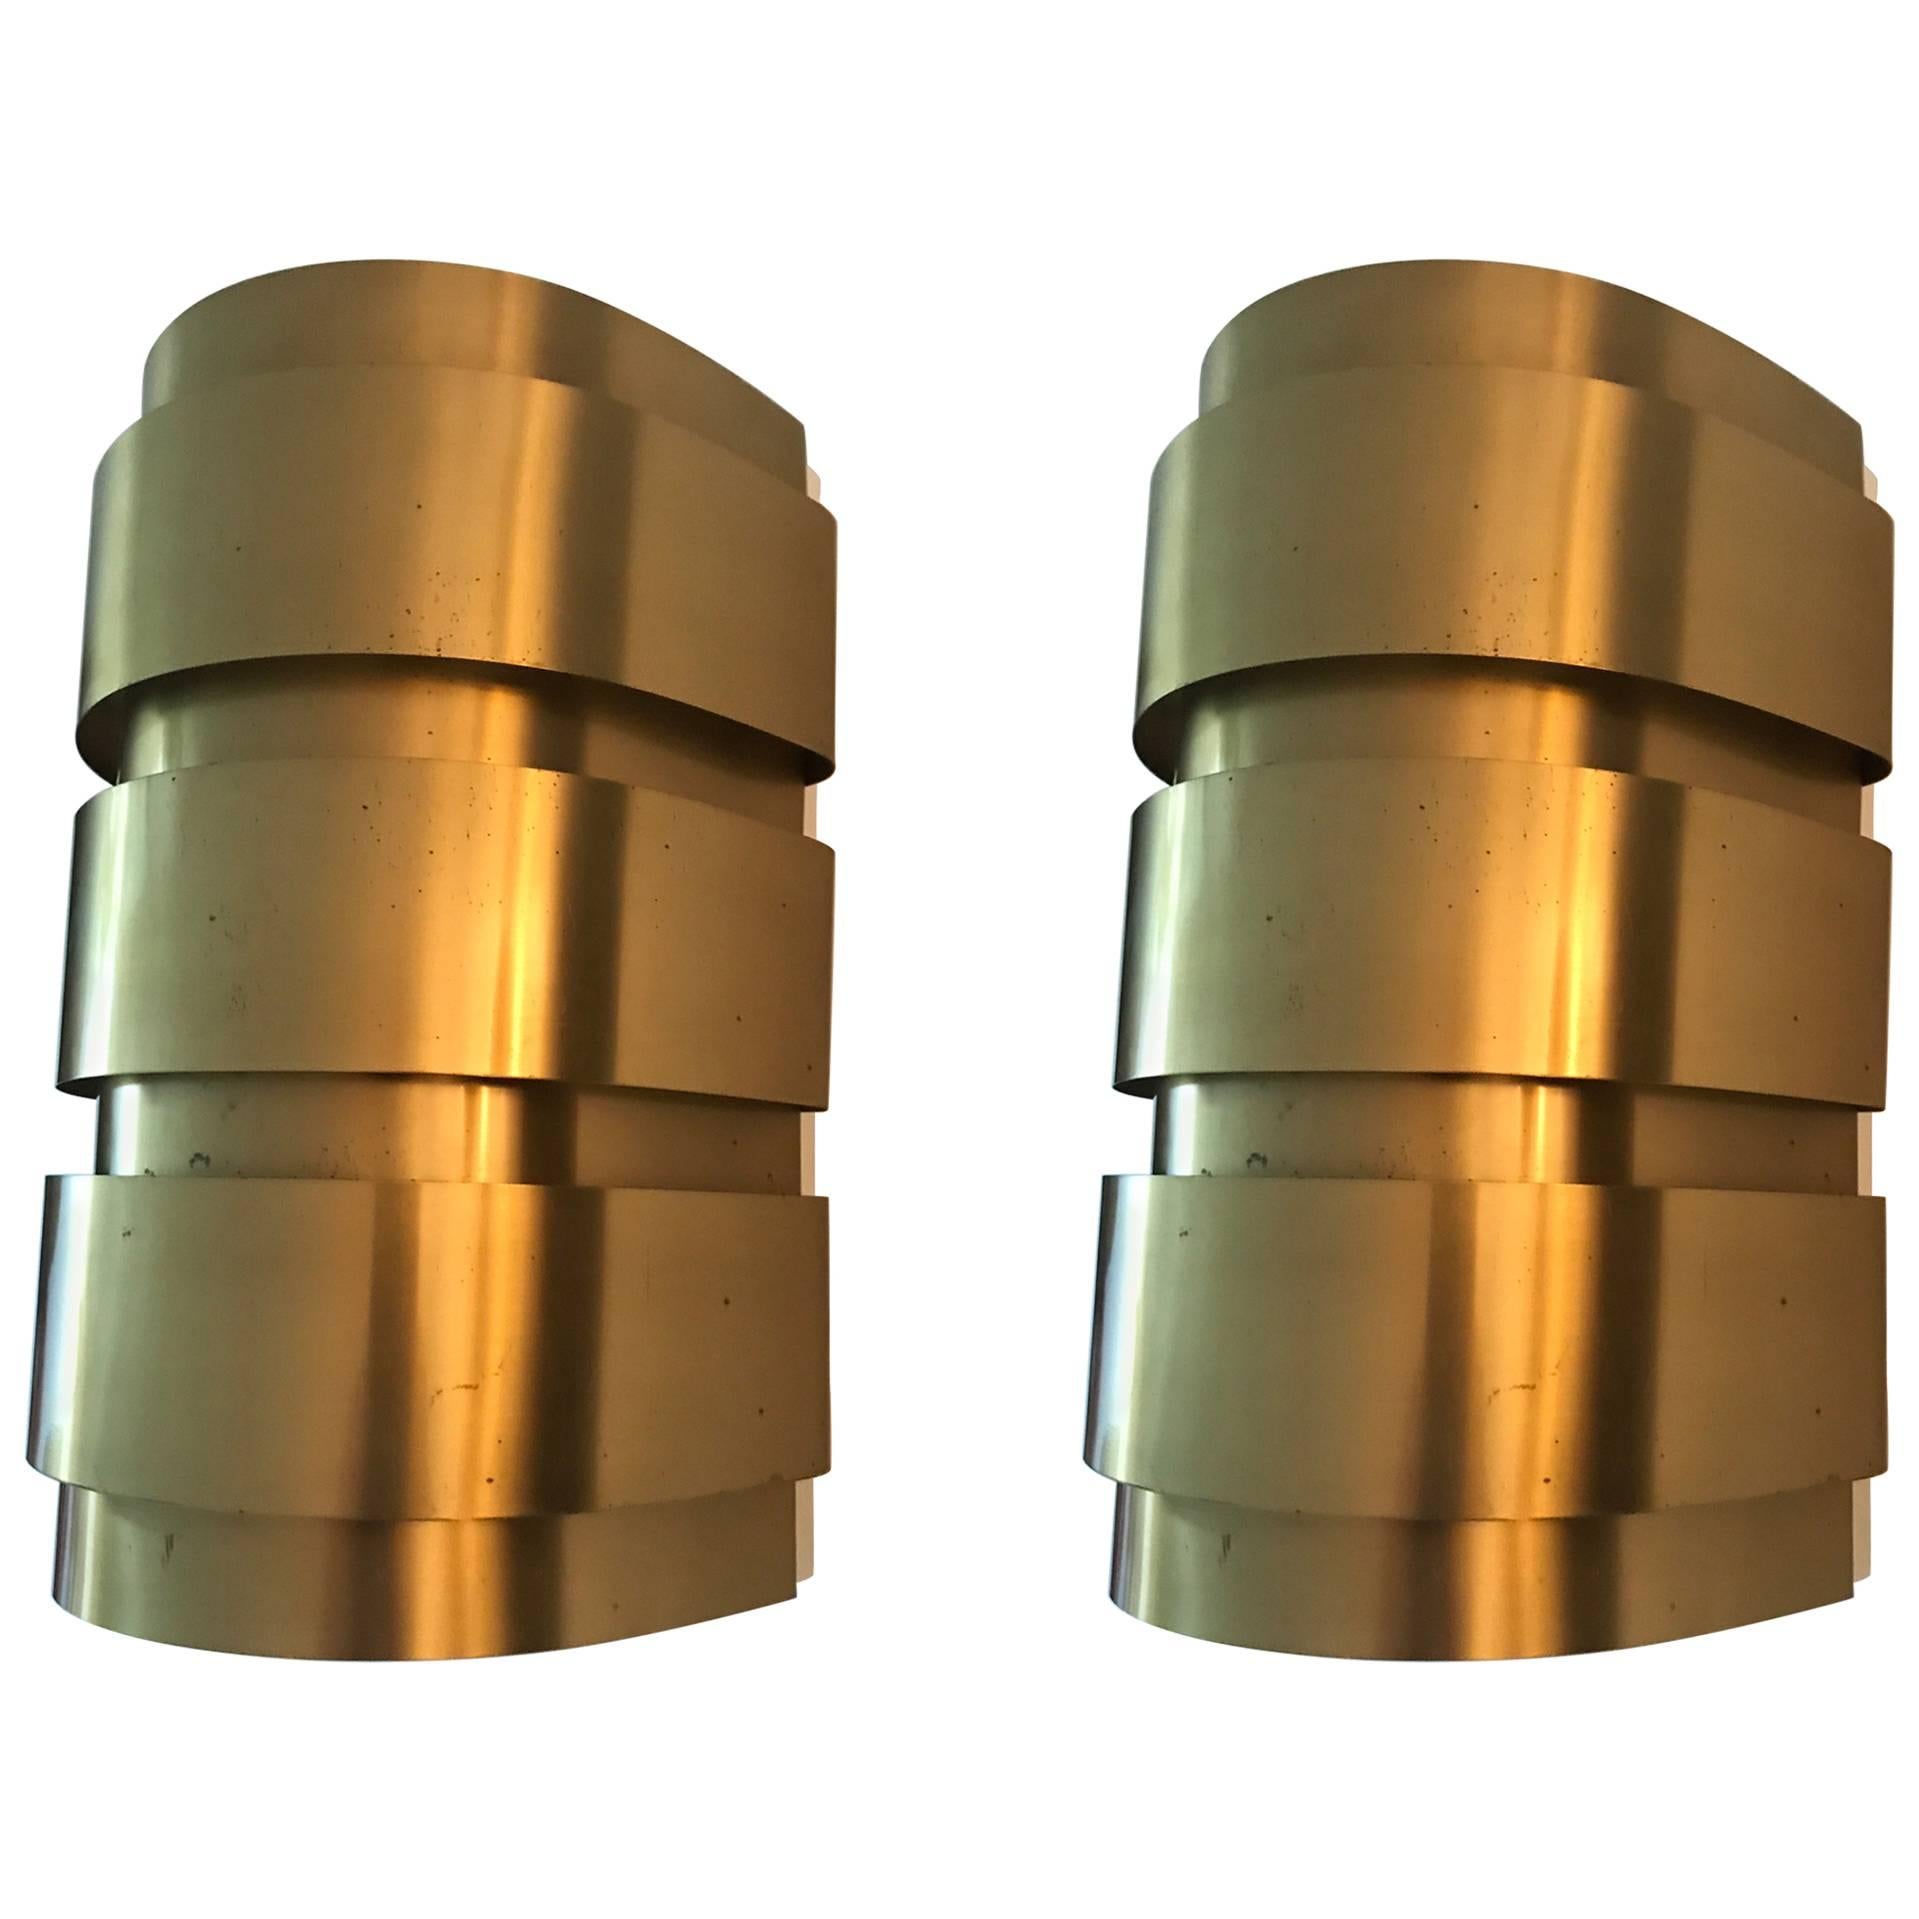 Pair of Swedish Hans-Agne Jakobsson V 155 Brass Wall Sconces Wall Lamps, 1960